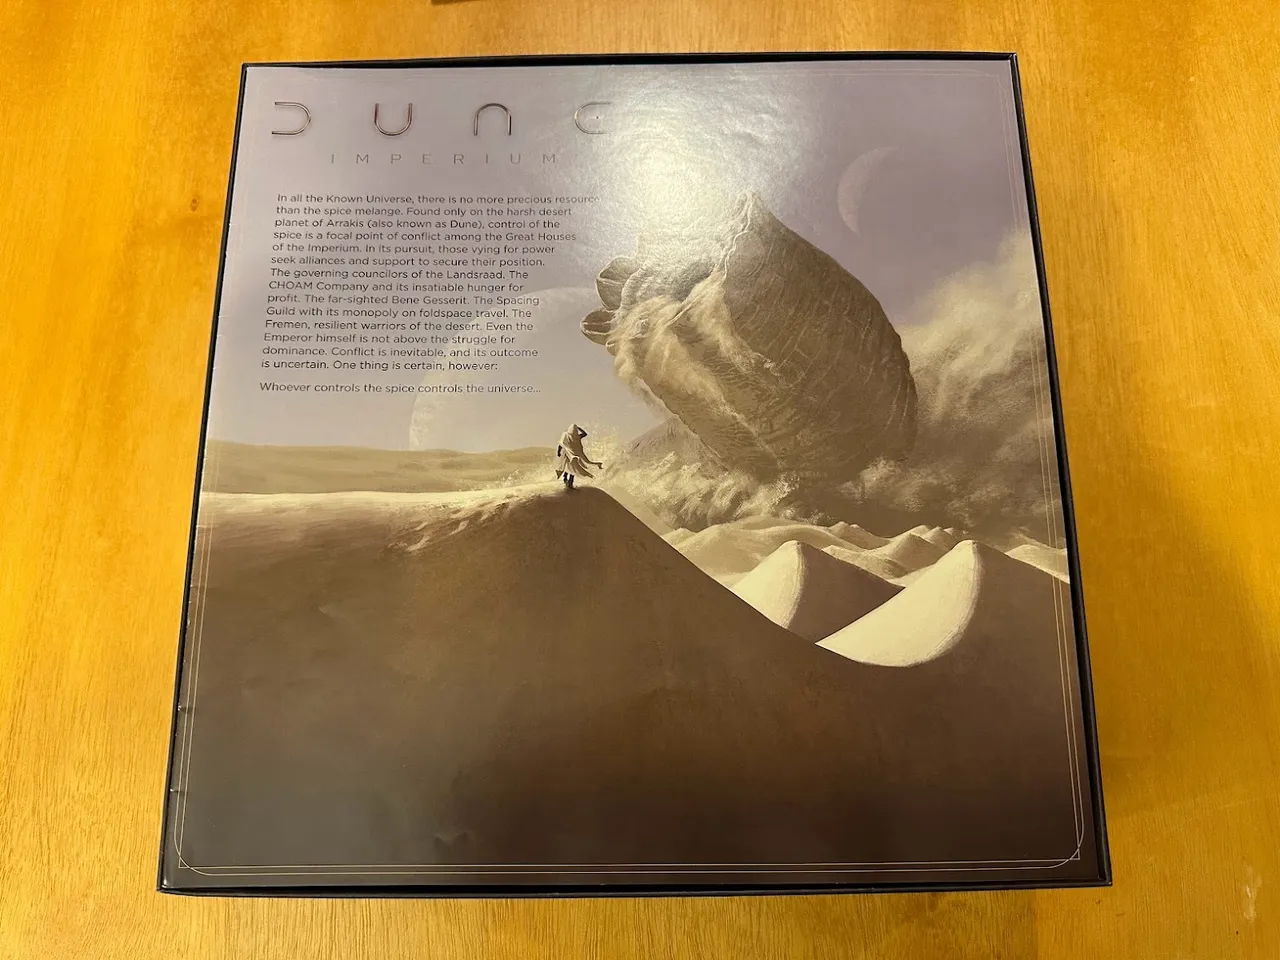 Dune: Imperium insert, with expansions by Hextra